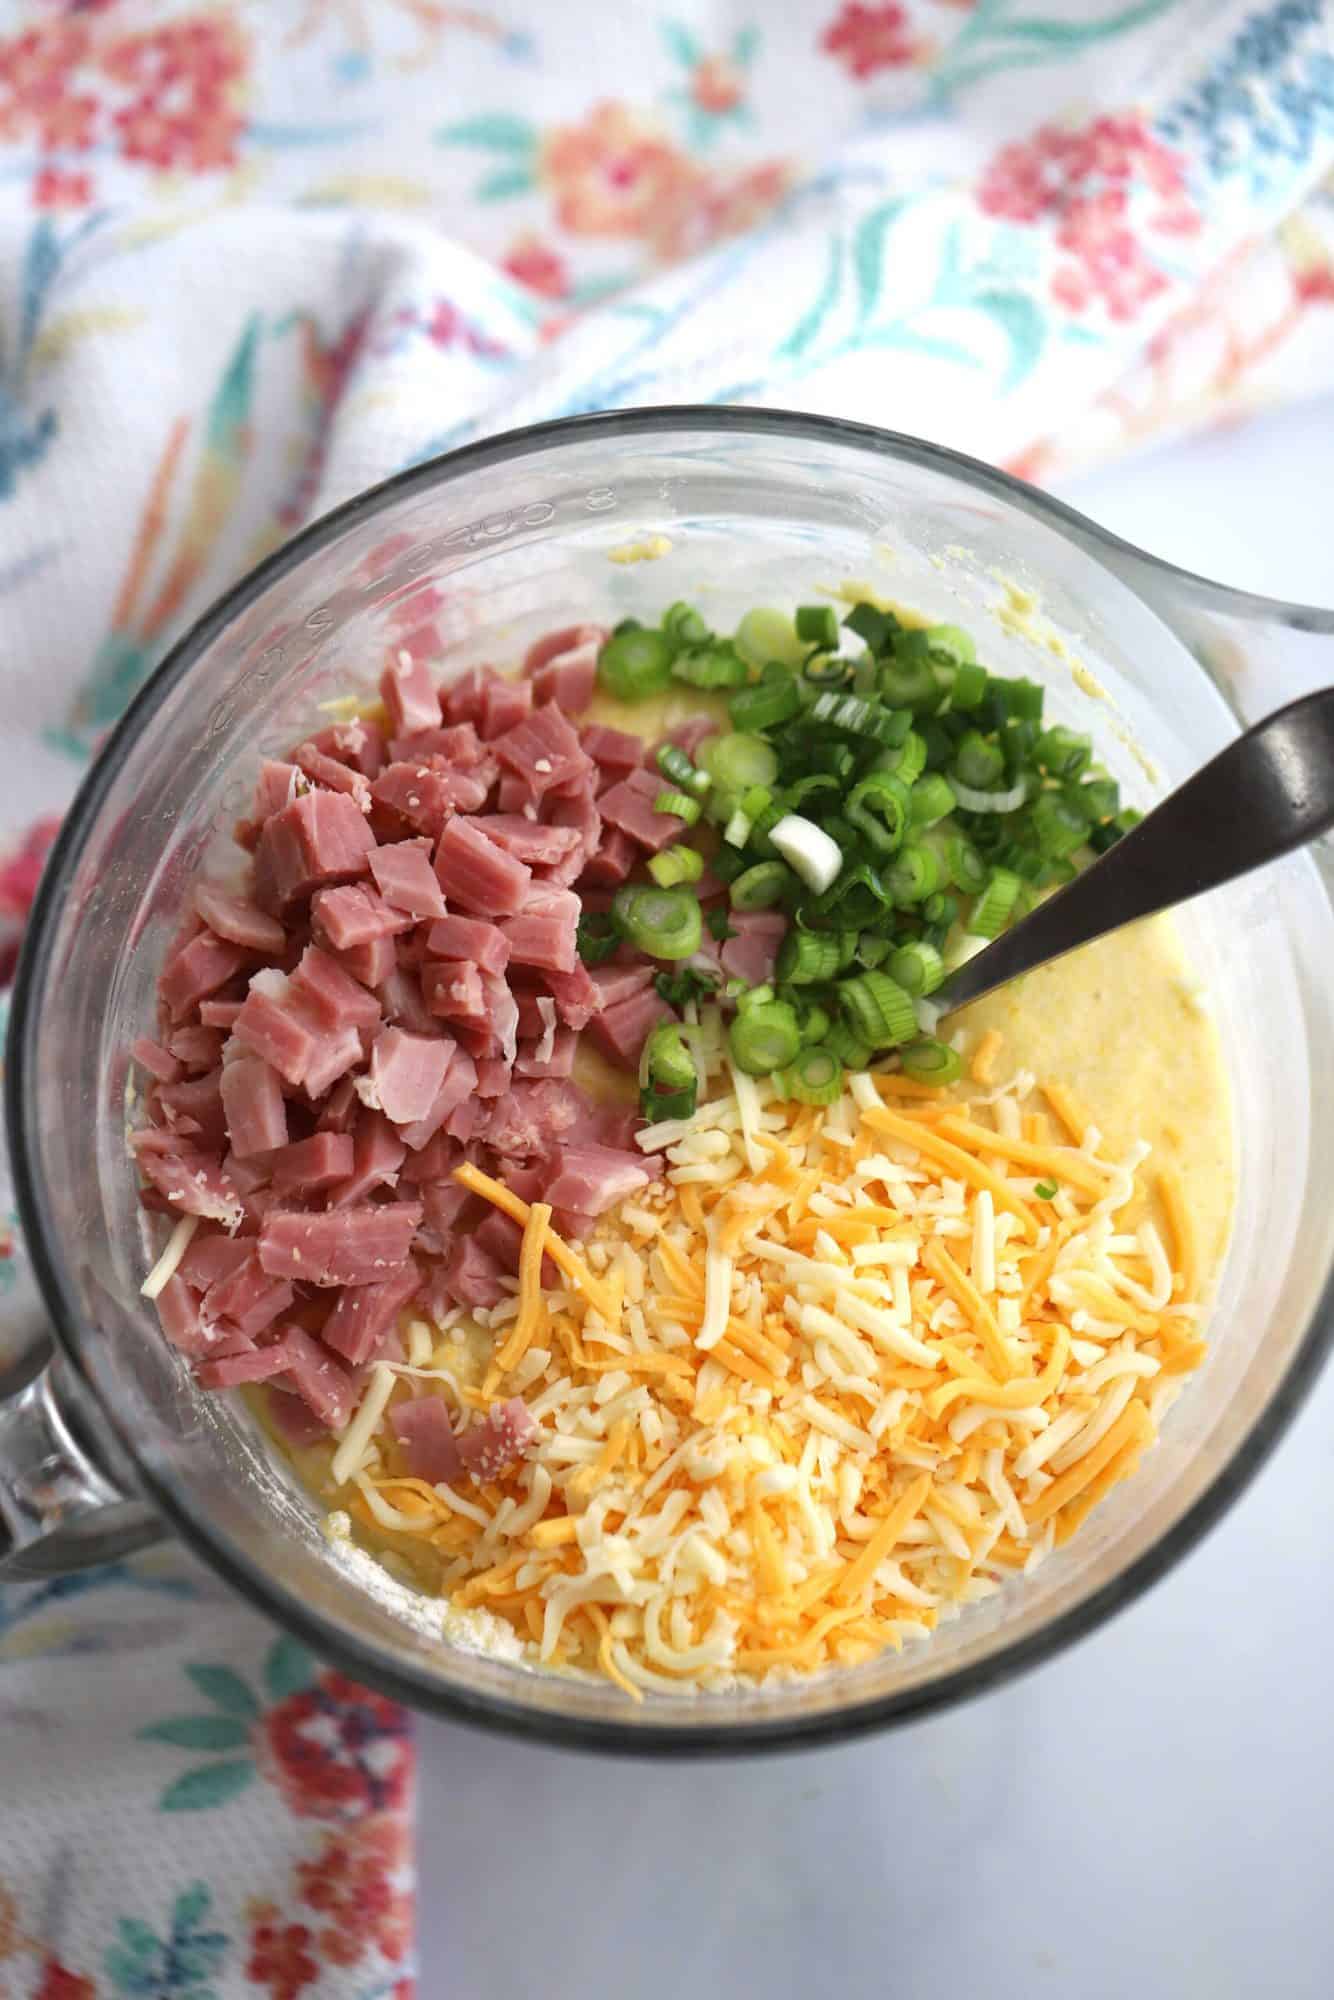 cornbread ingredients in a bowl with ham, sliced onion, and sharp cheddar cheese